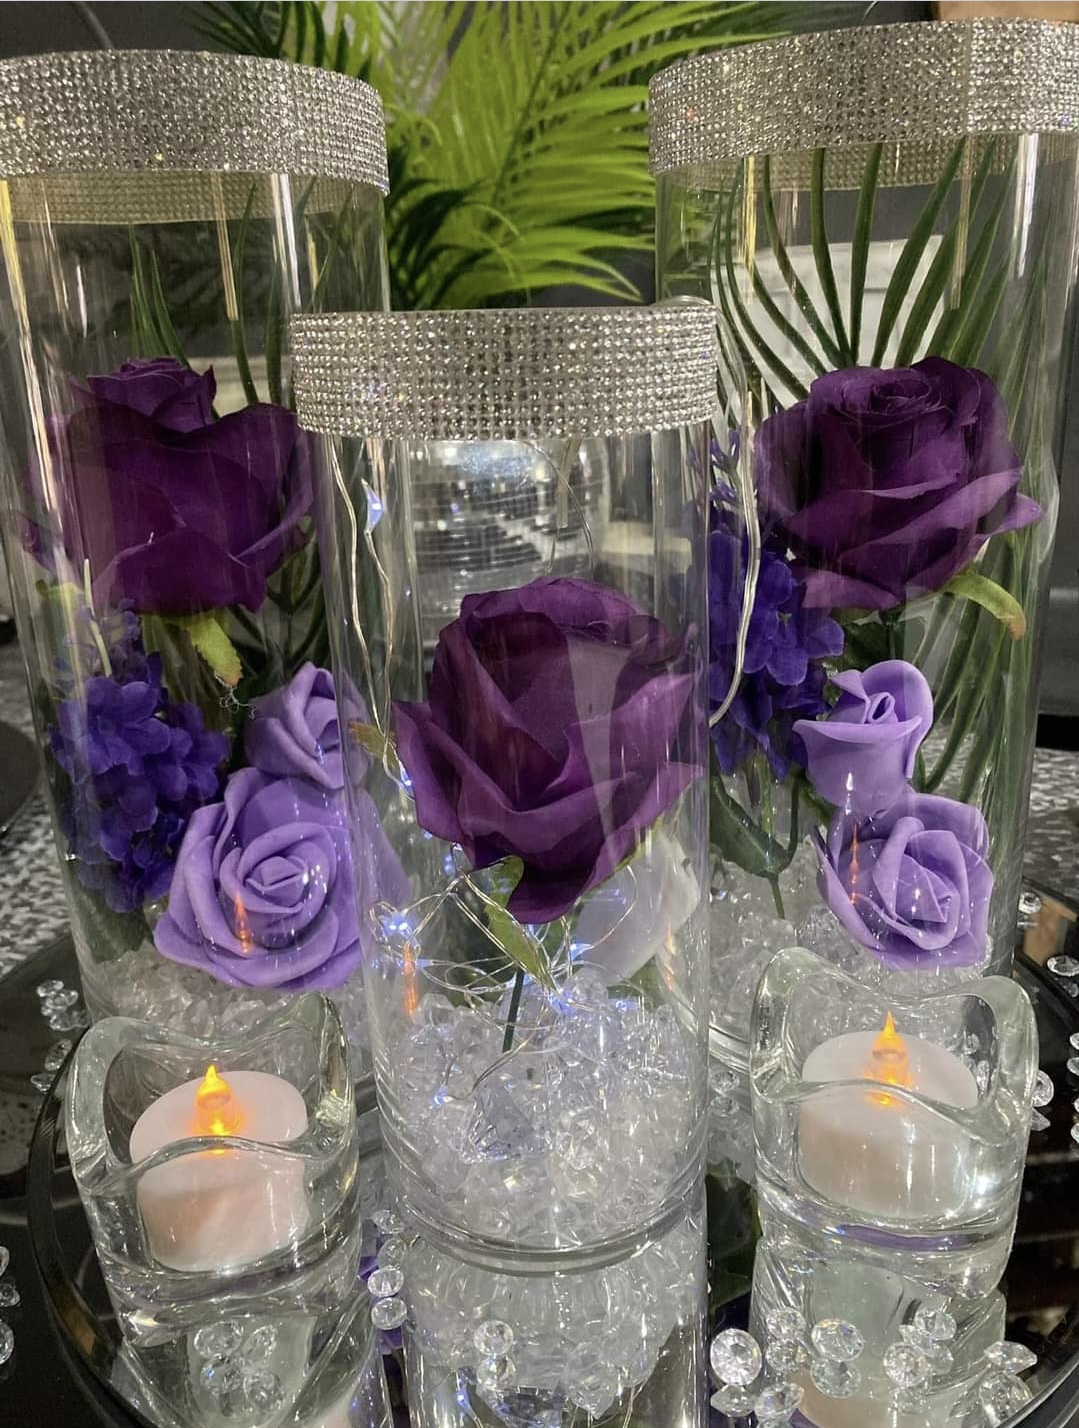 3 glass vases with diamanté rims and filled with purple flowers